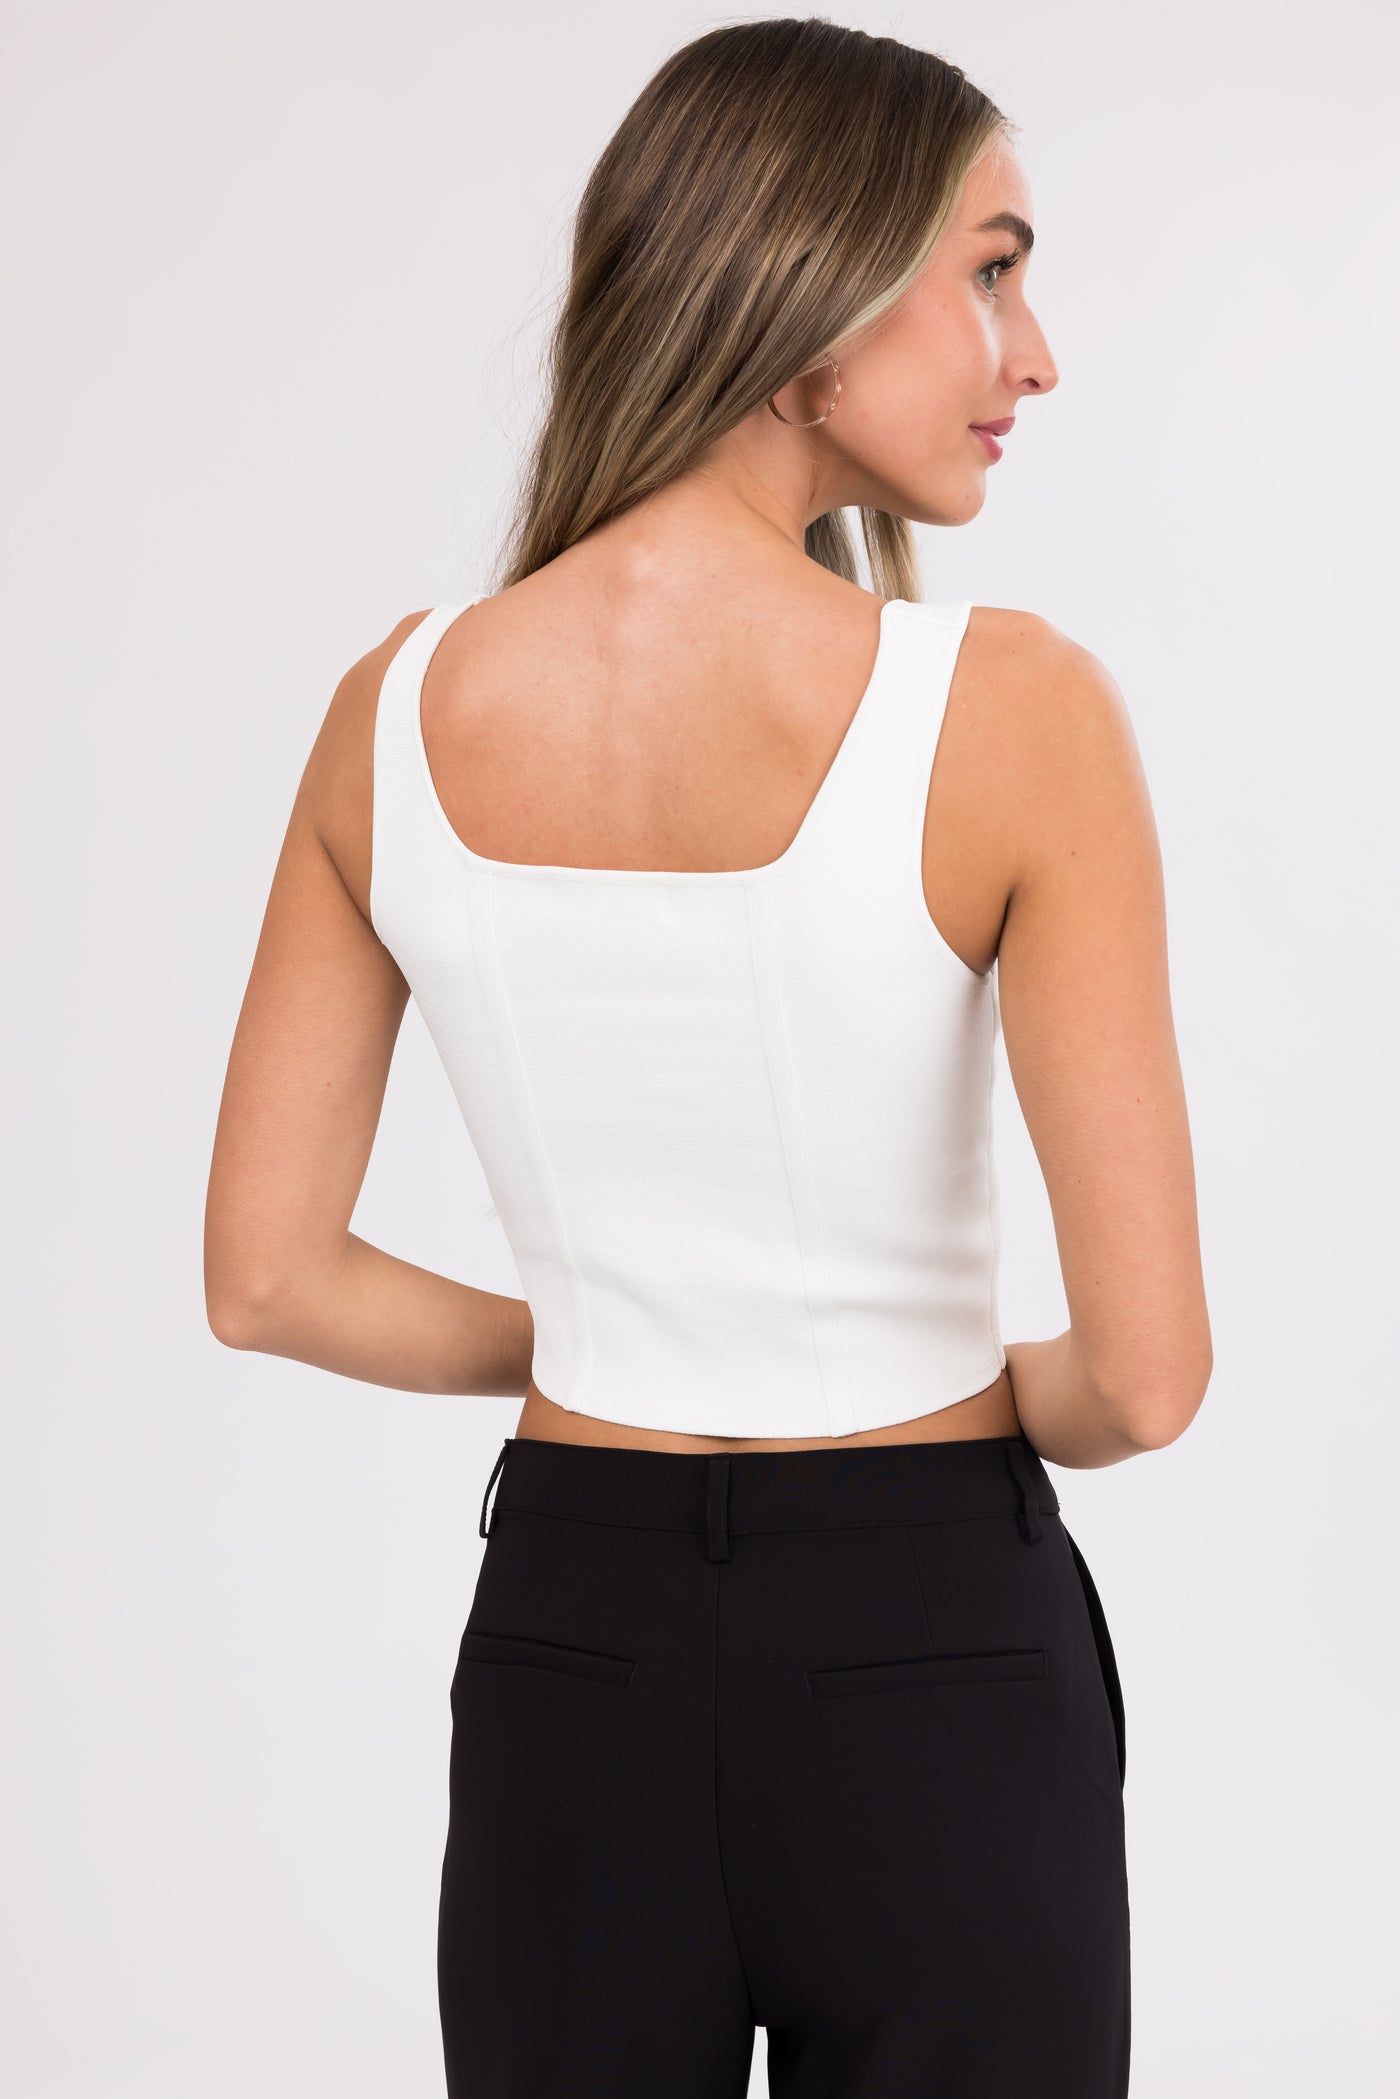 Ivory Square Neck Thick Sleeveless Crop Top